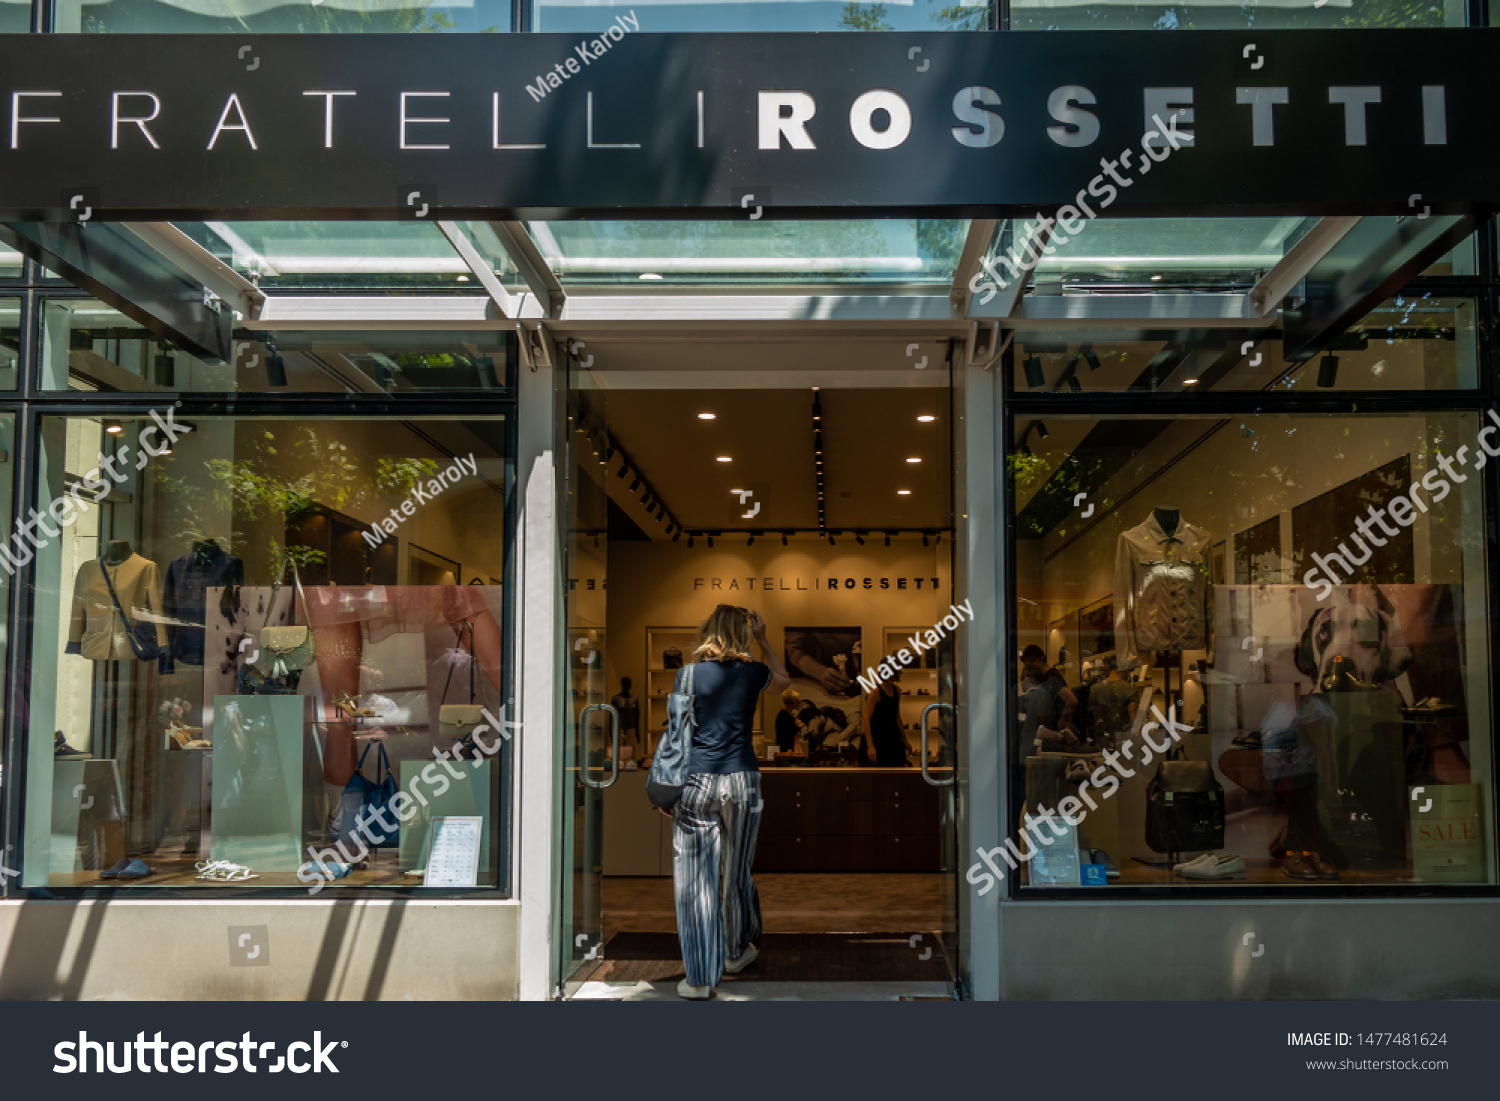 fratelli rossetti outlet milano